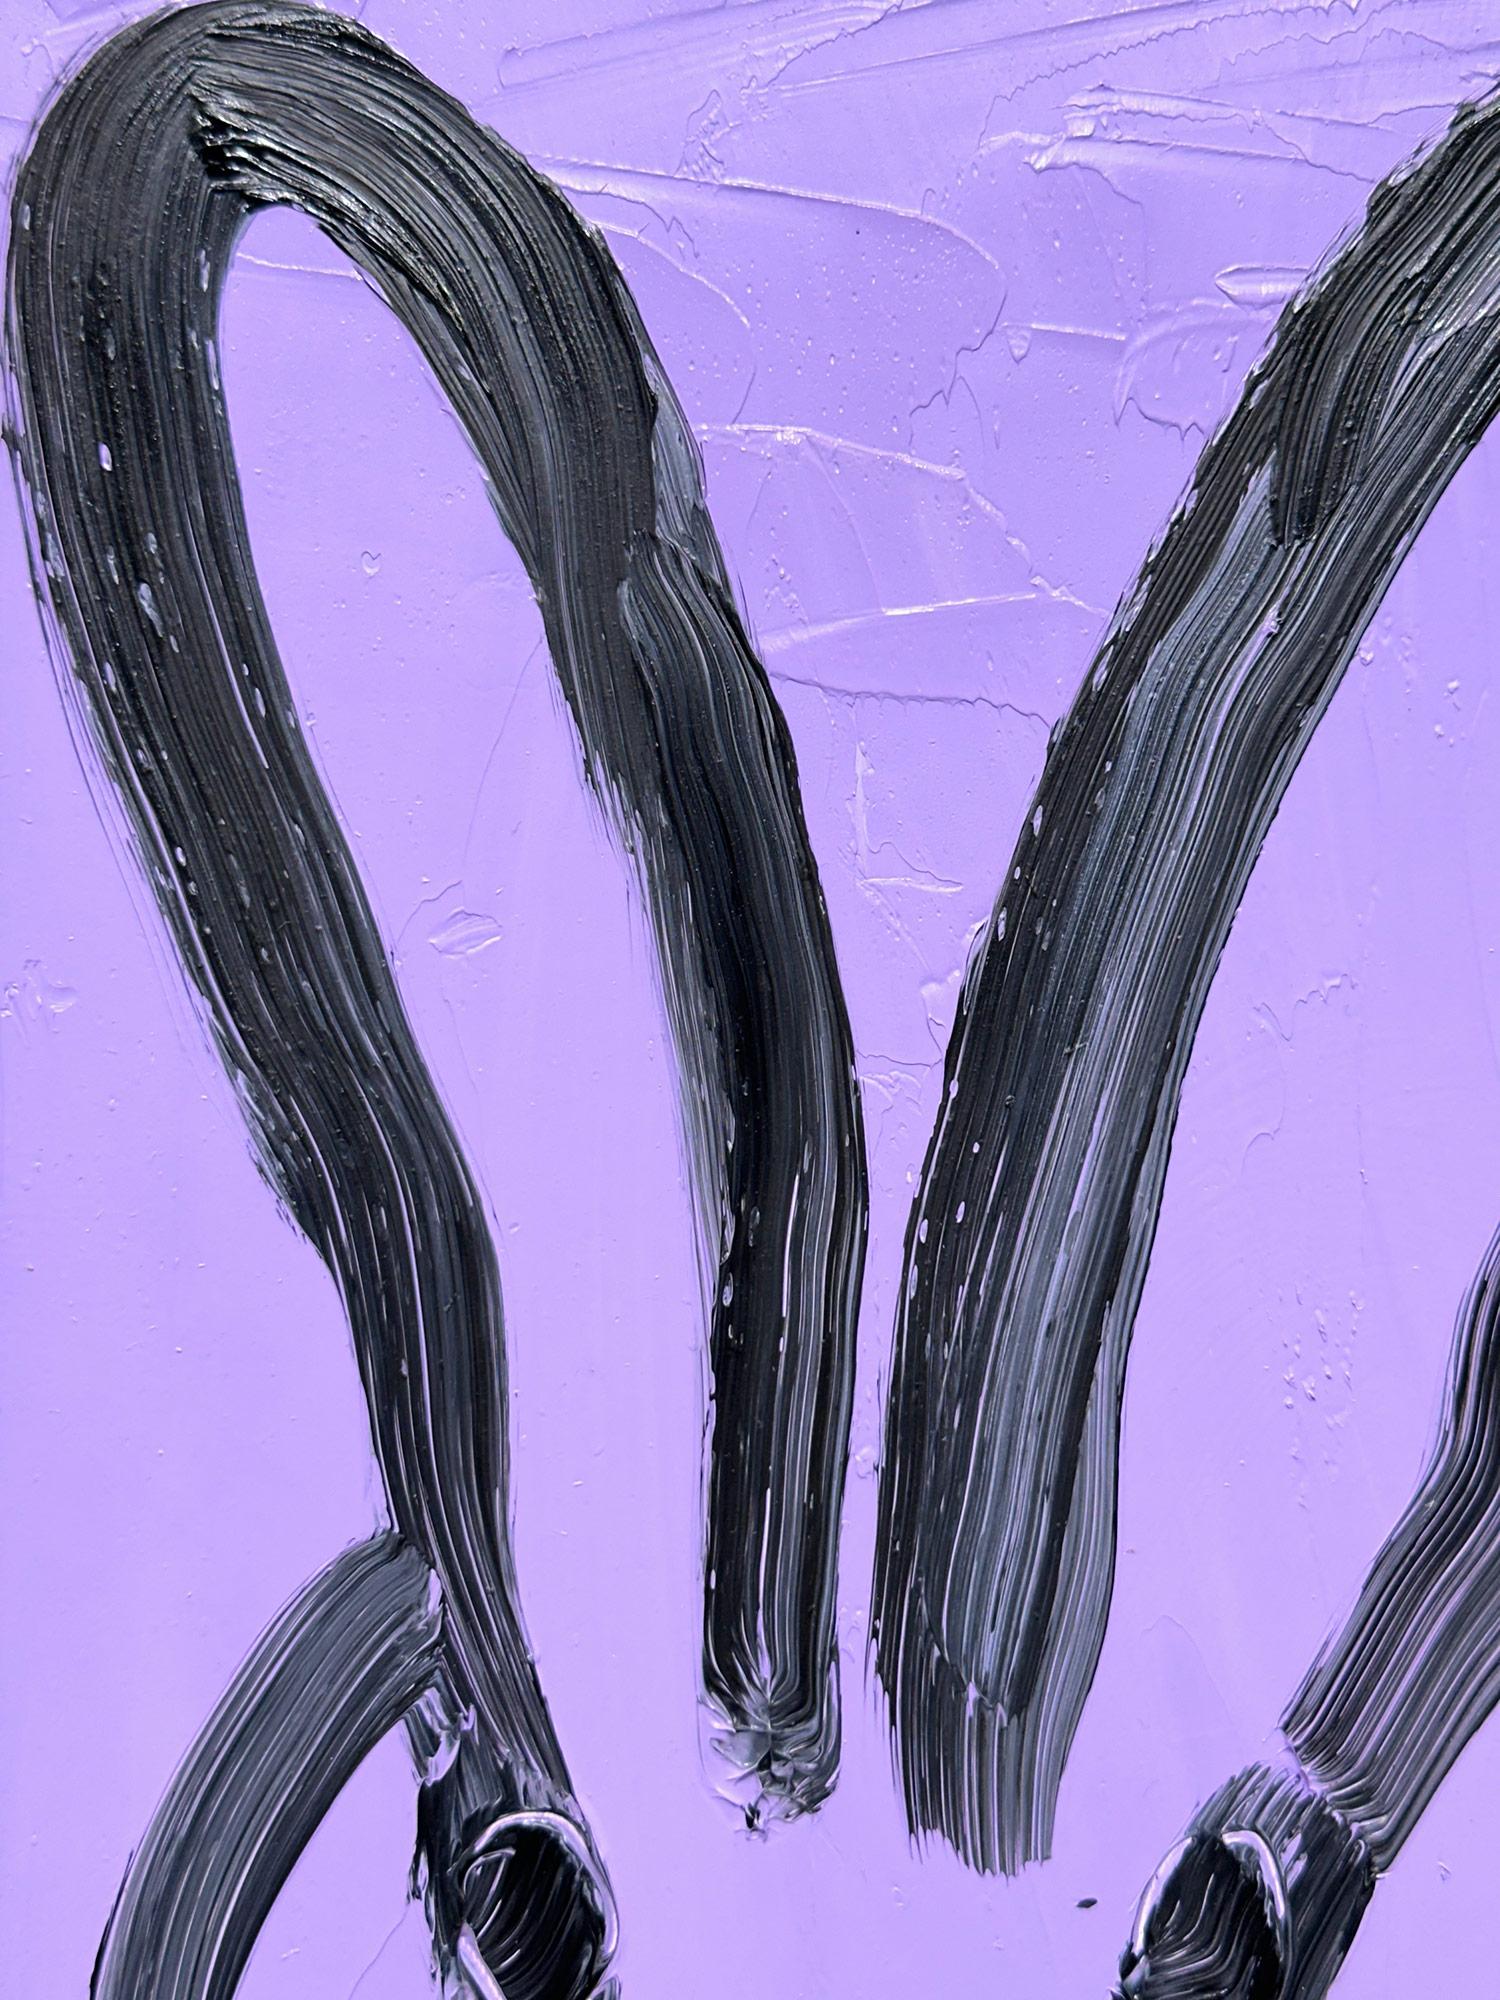 A wonderful composition of one of Slonem's most iconic subjects, Bunnies. This piece depicts a gestural figure of a black bunny on a Purple Lavender background with thick use of paint. It is housed in a wonderful silver frame. Inspired by nature and